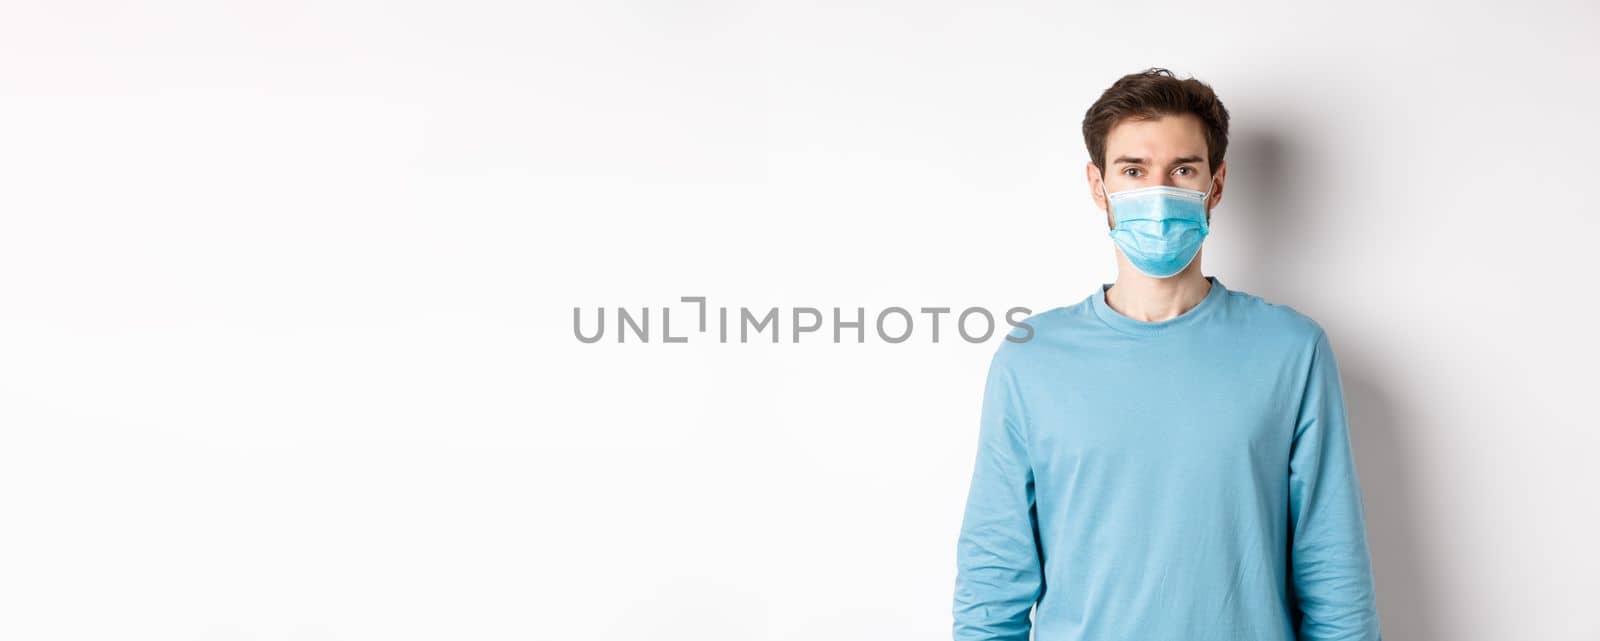 Covid-19, pandemic and social distancing concept. Young man wearing medical mask from coronavirus, standing over white background.